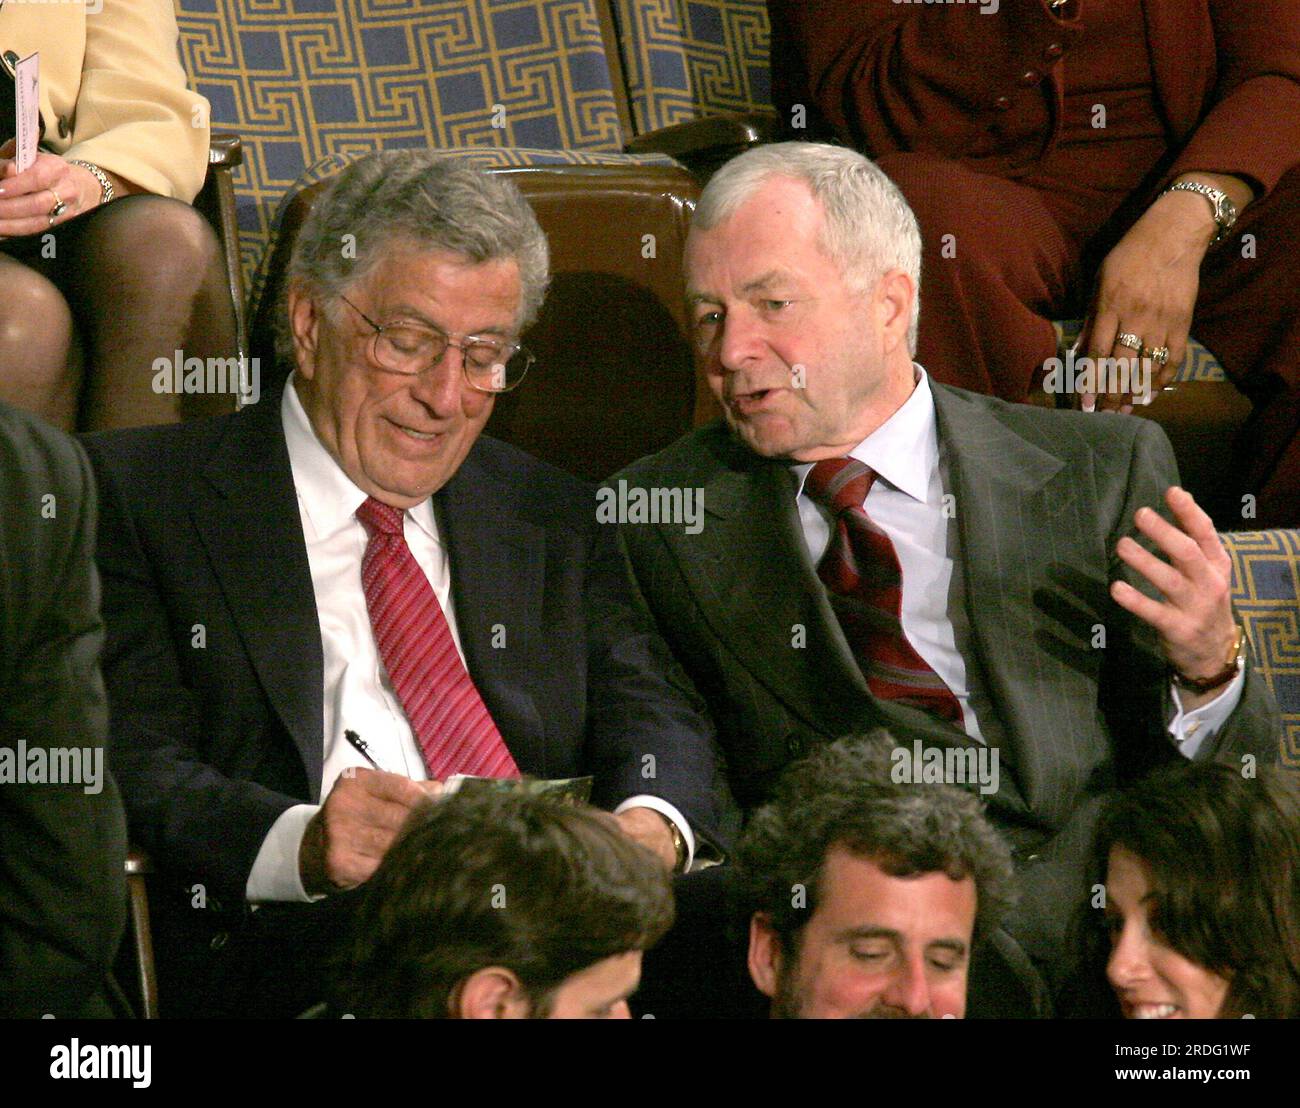 Washington, United States Of America. 04th Jan, 2007. Washington, DC - January 4, 2007 -- Singer Tony Bennett, left, and an unidentified gentlemen, right, watch the voting for United States Representative Nancy Pelosi (Democrat of the 8th District of California) as the Speaker of the United States House of Representatives in the Capitol in Washington, DC on Thursday, January 4, 2007. Speaker Pelosi is the first woman in U.S. history to serve in that position.Credit: Ron Sachs/CNP/Sipa USA Credit: Sipa USA/Alamy Live News Stock Photo